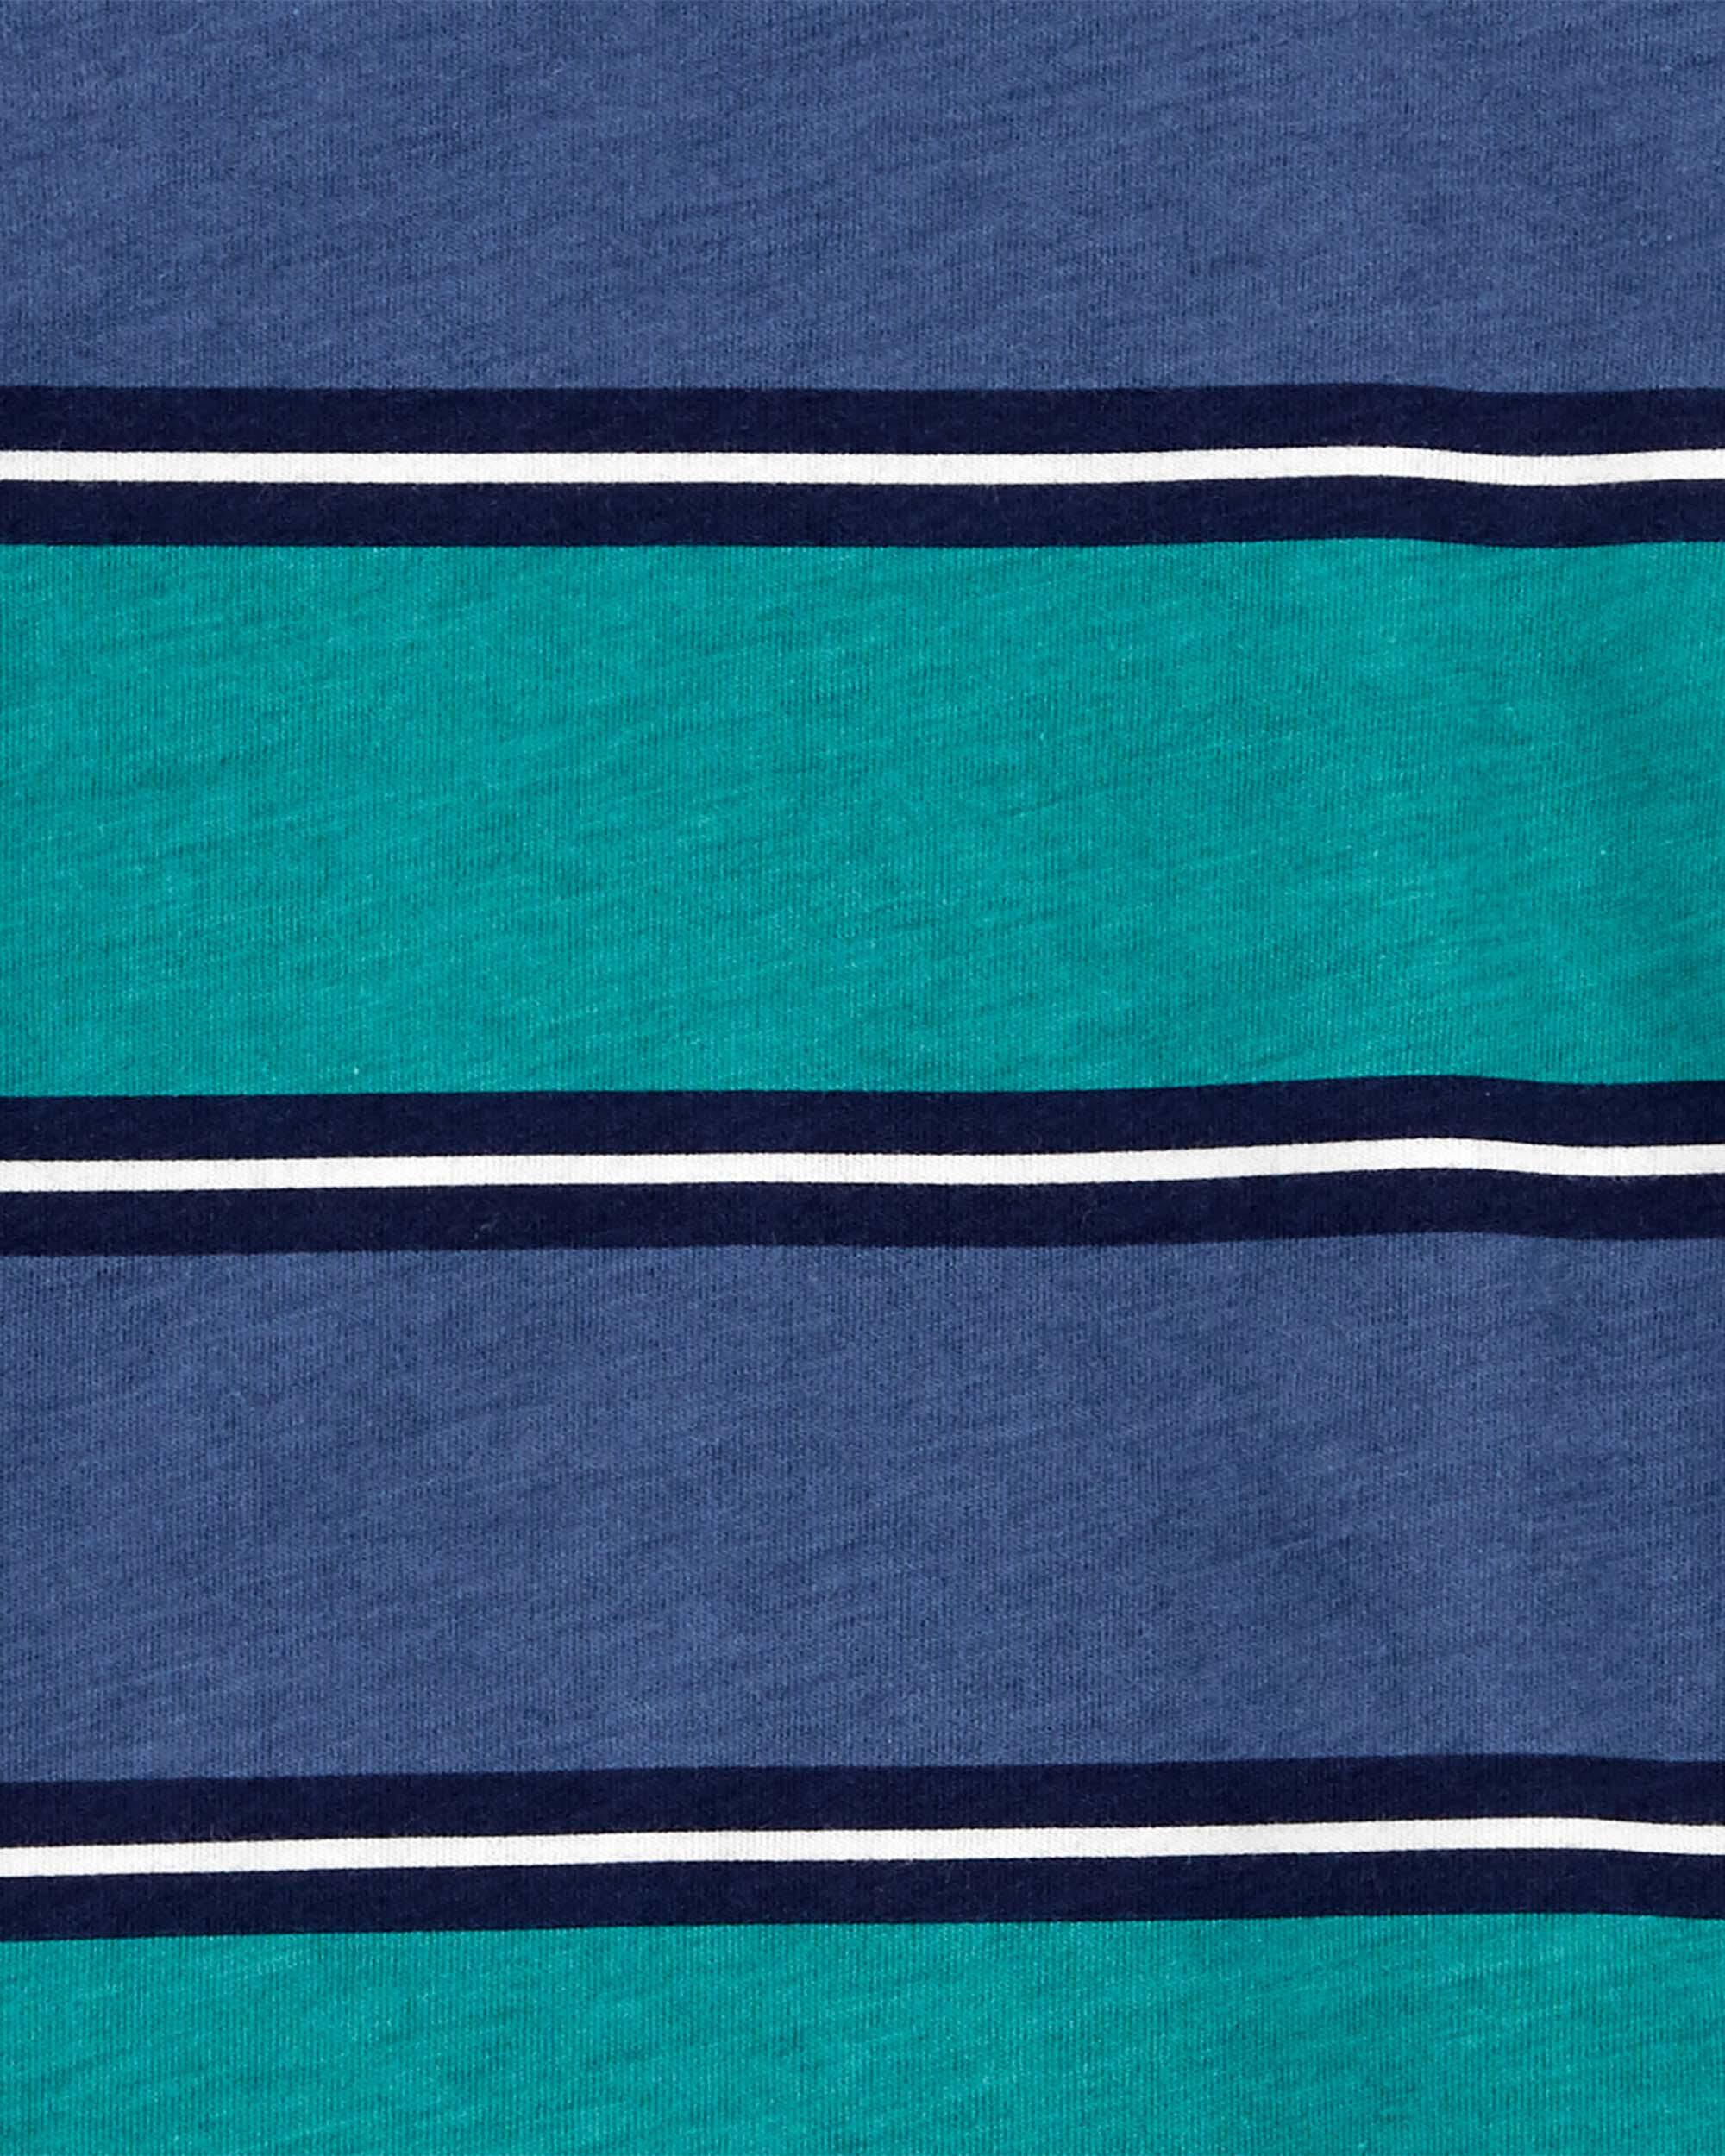 Baby Striped Jersey Tee